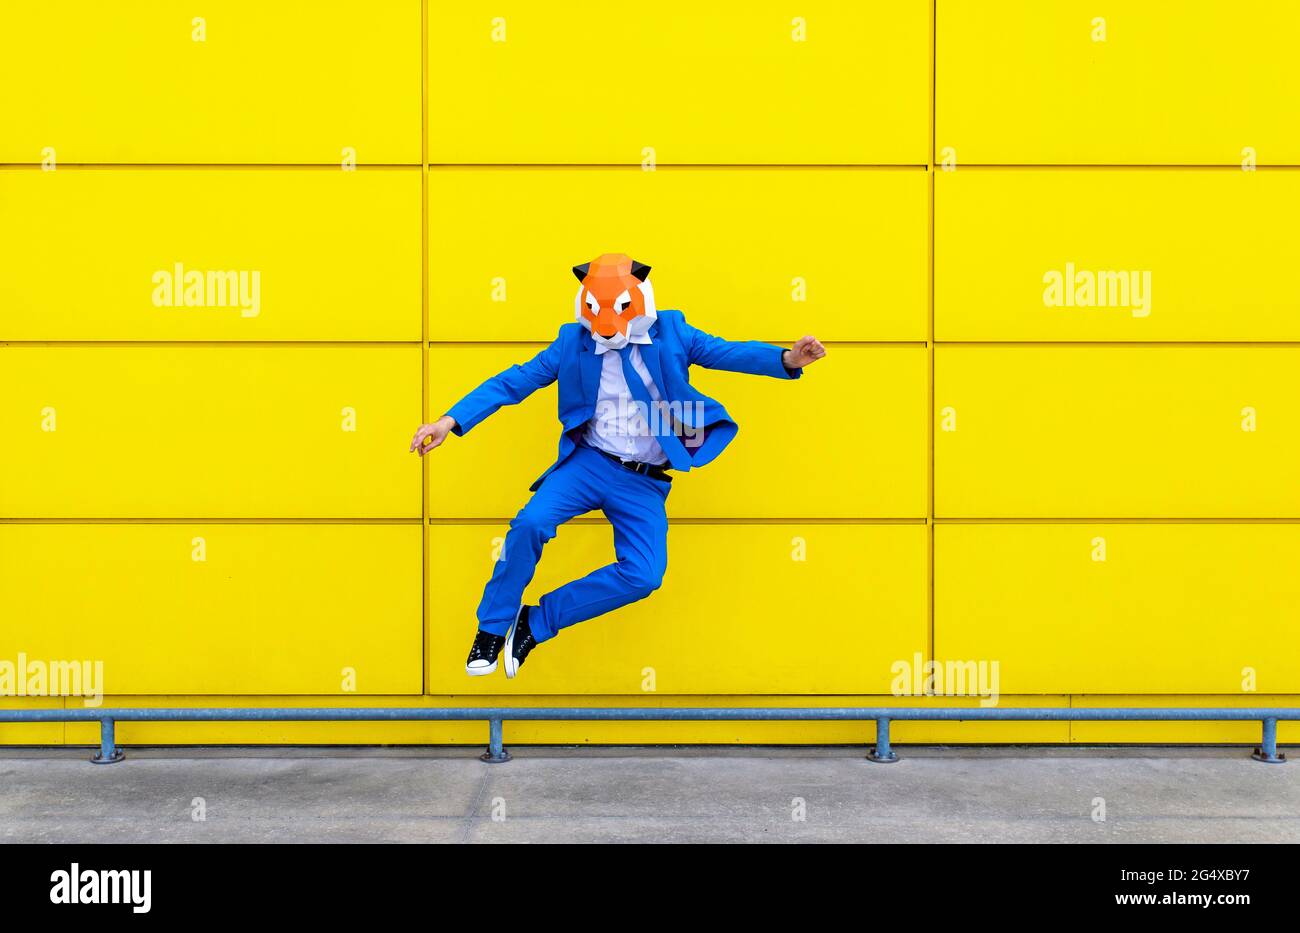 Man wearing vibrant blue suit and tiger mask jumping against yellow wall Stock Photo